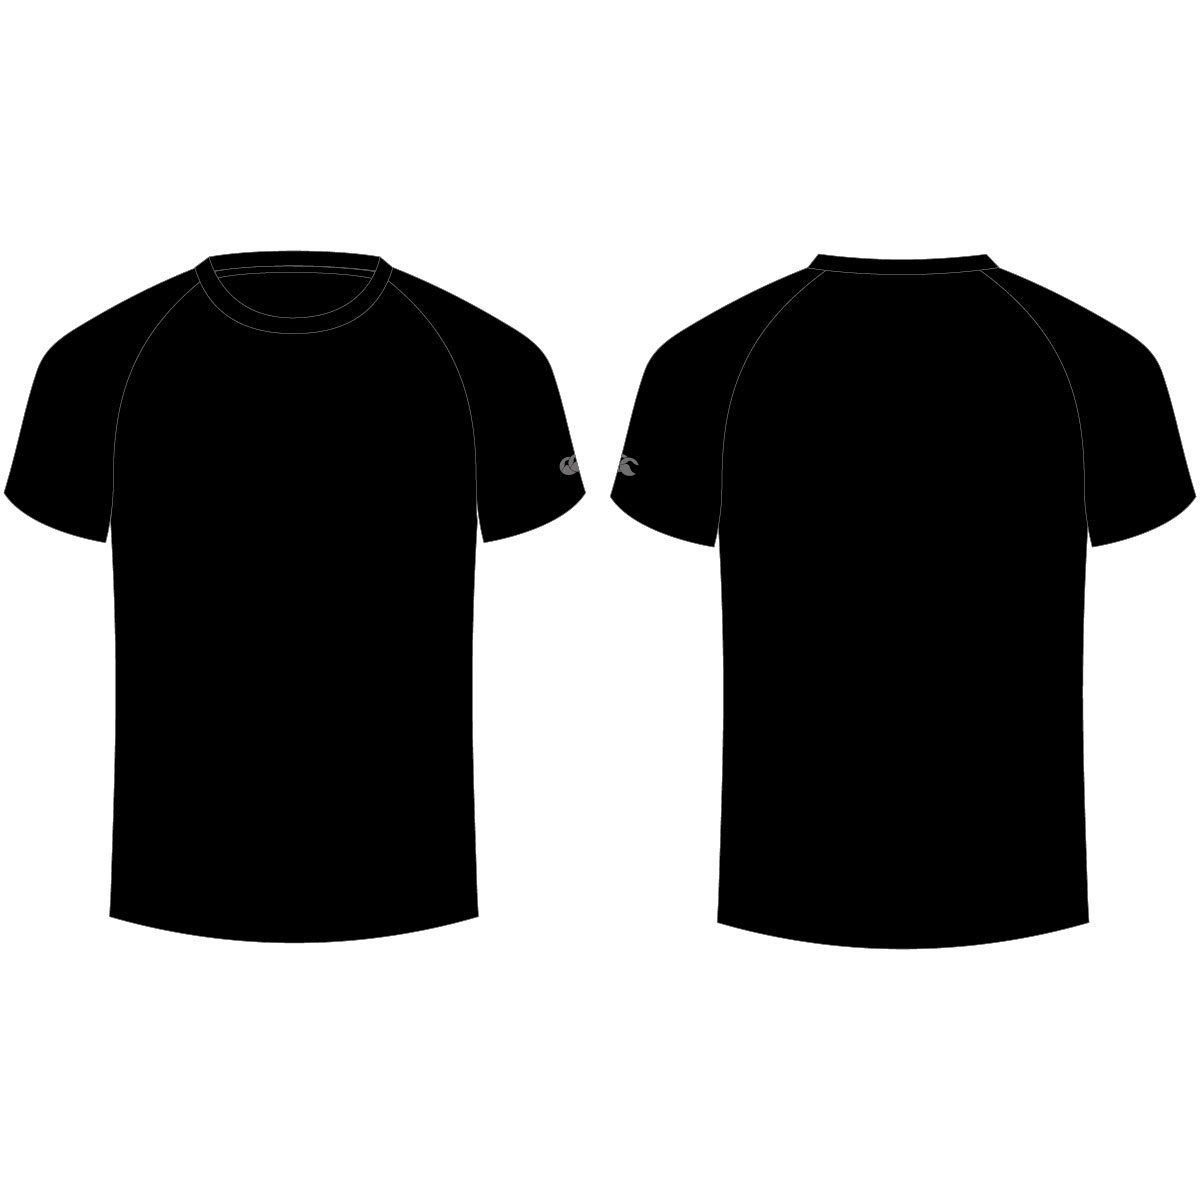 Black Tshirt Plain With Front And Back - ClipArt Best - ClipArt Best ...